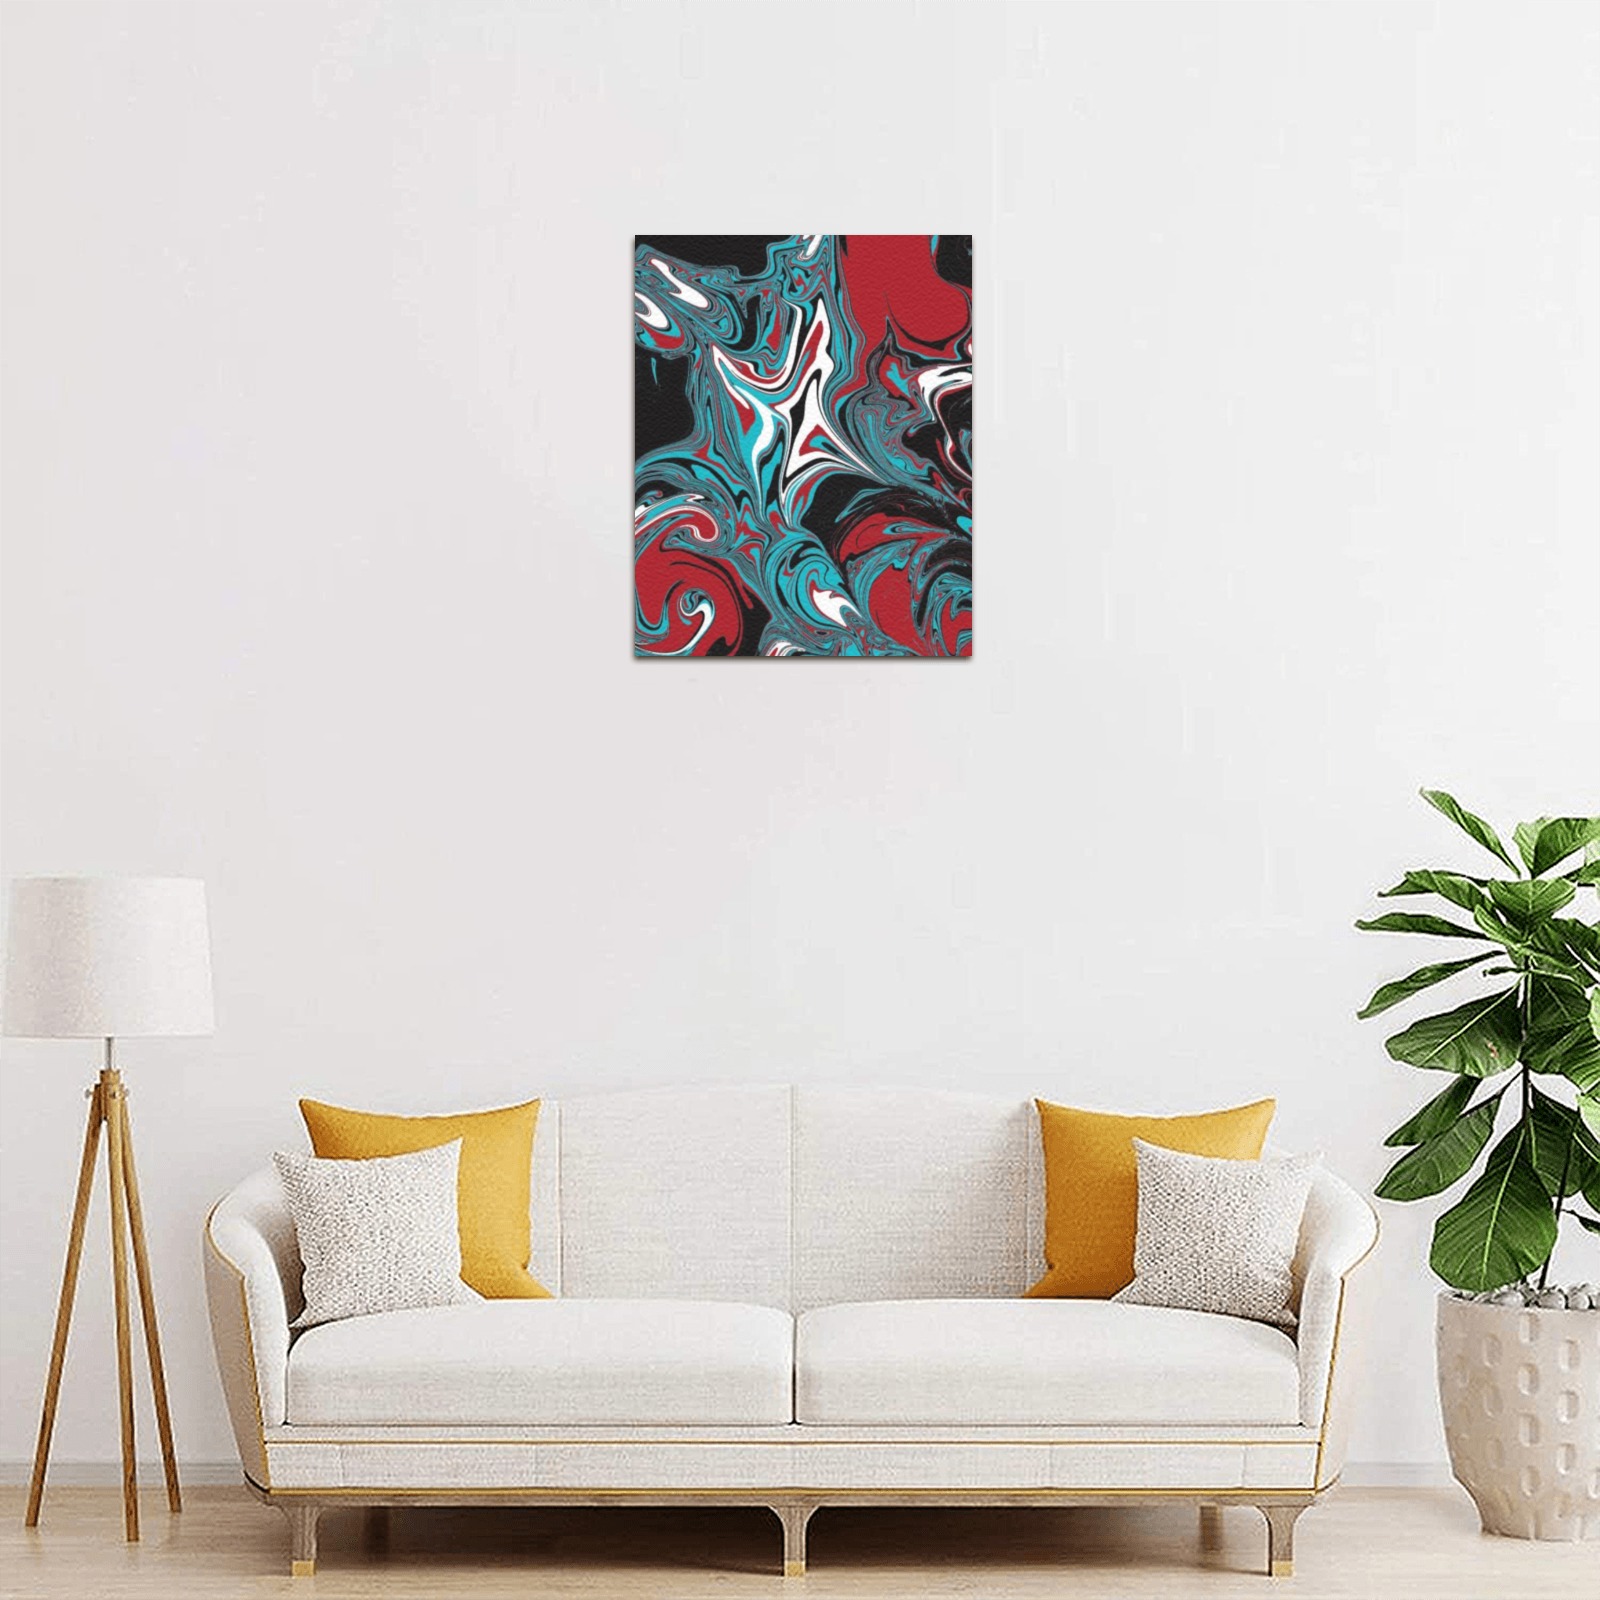 Dark Wave of Colors Frame Canvas Print 8"x10"